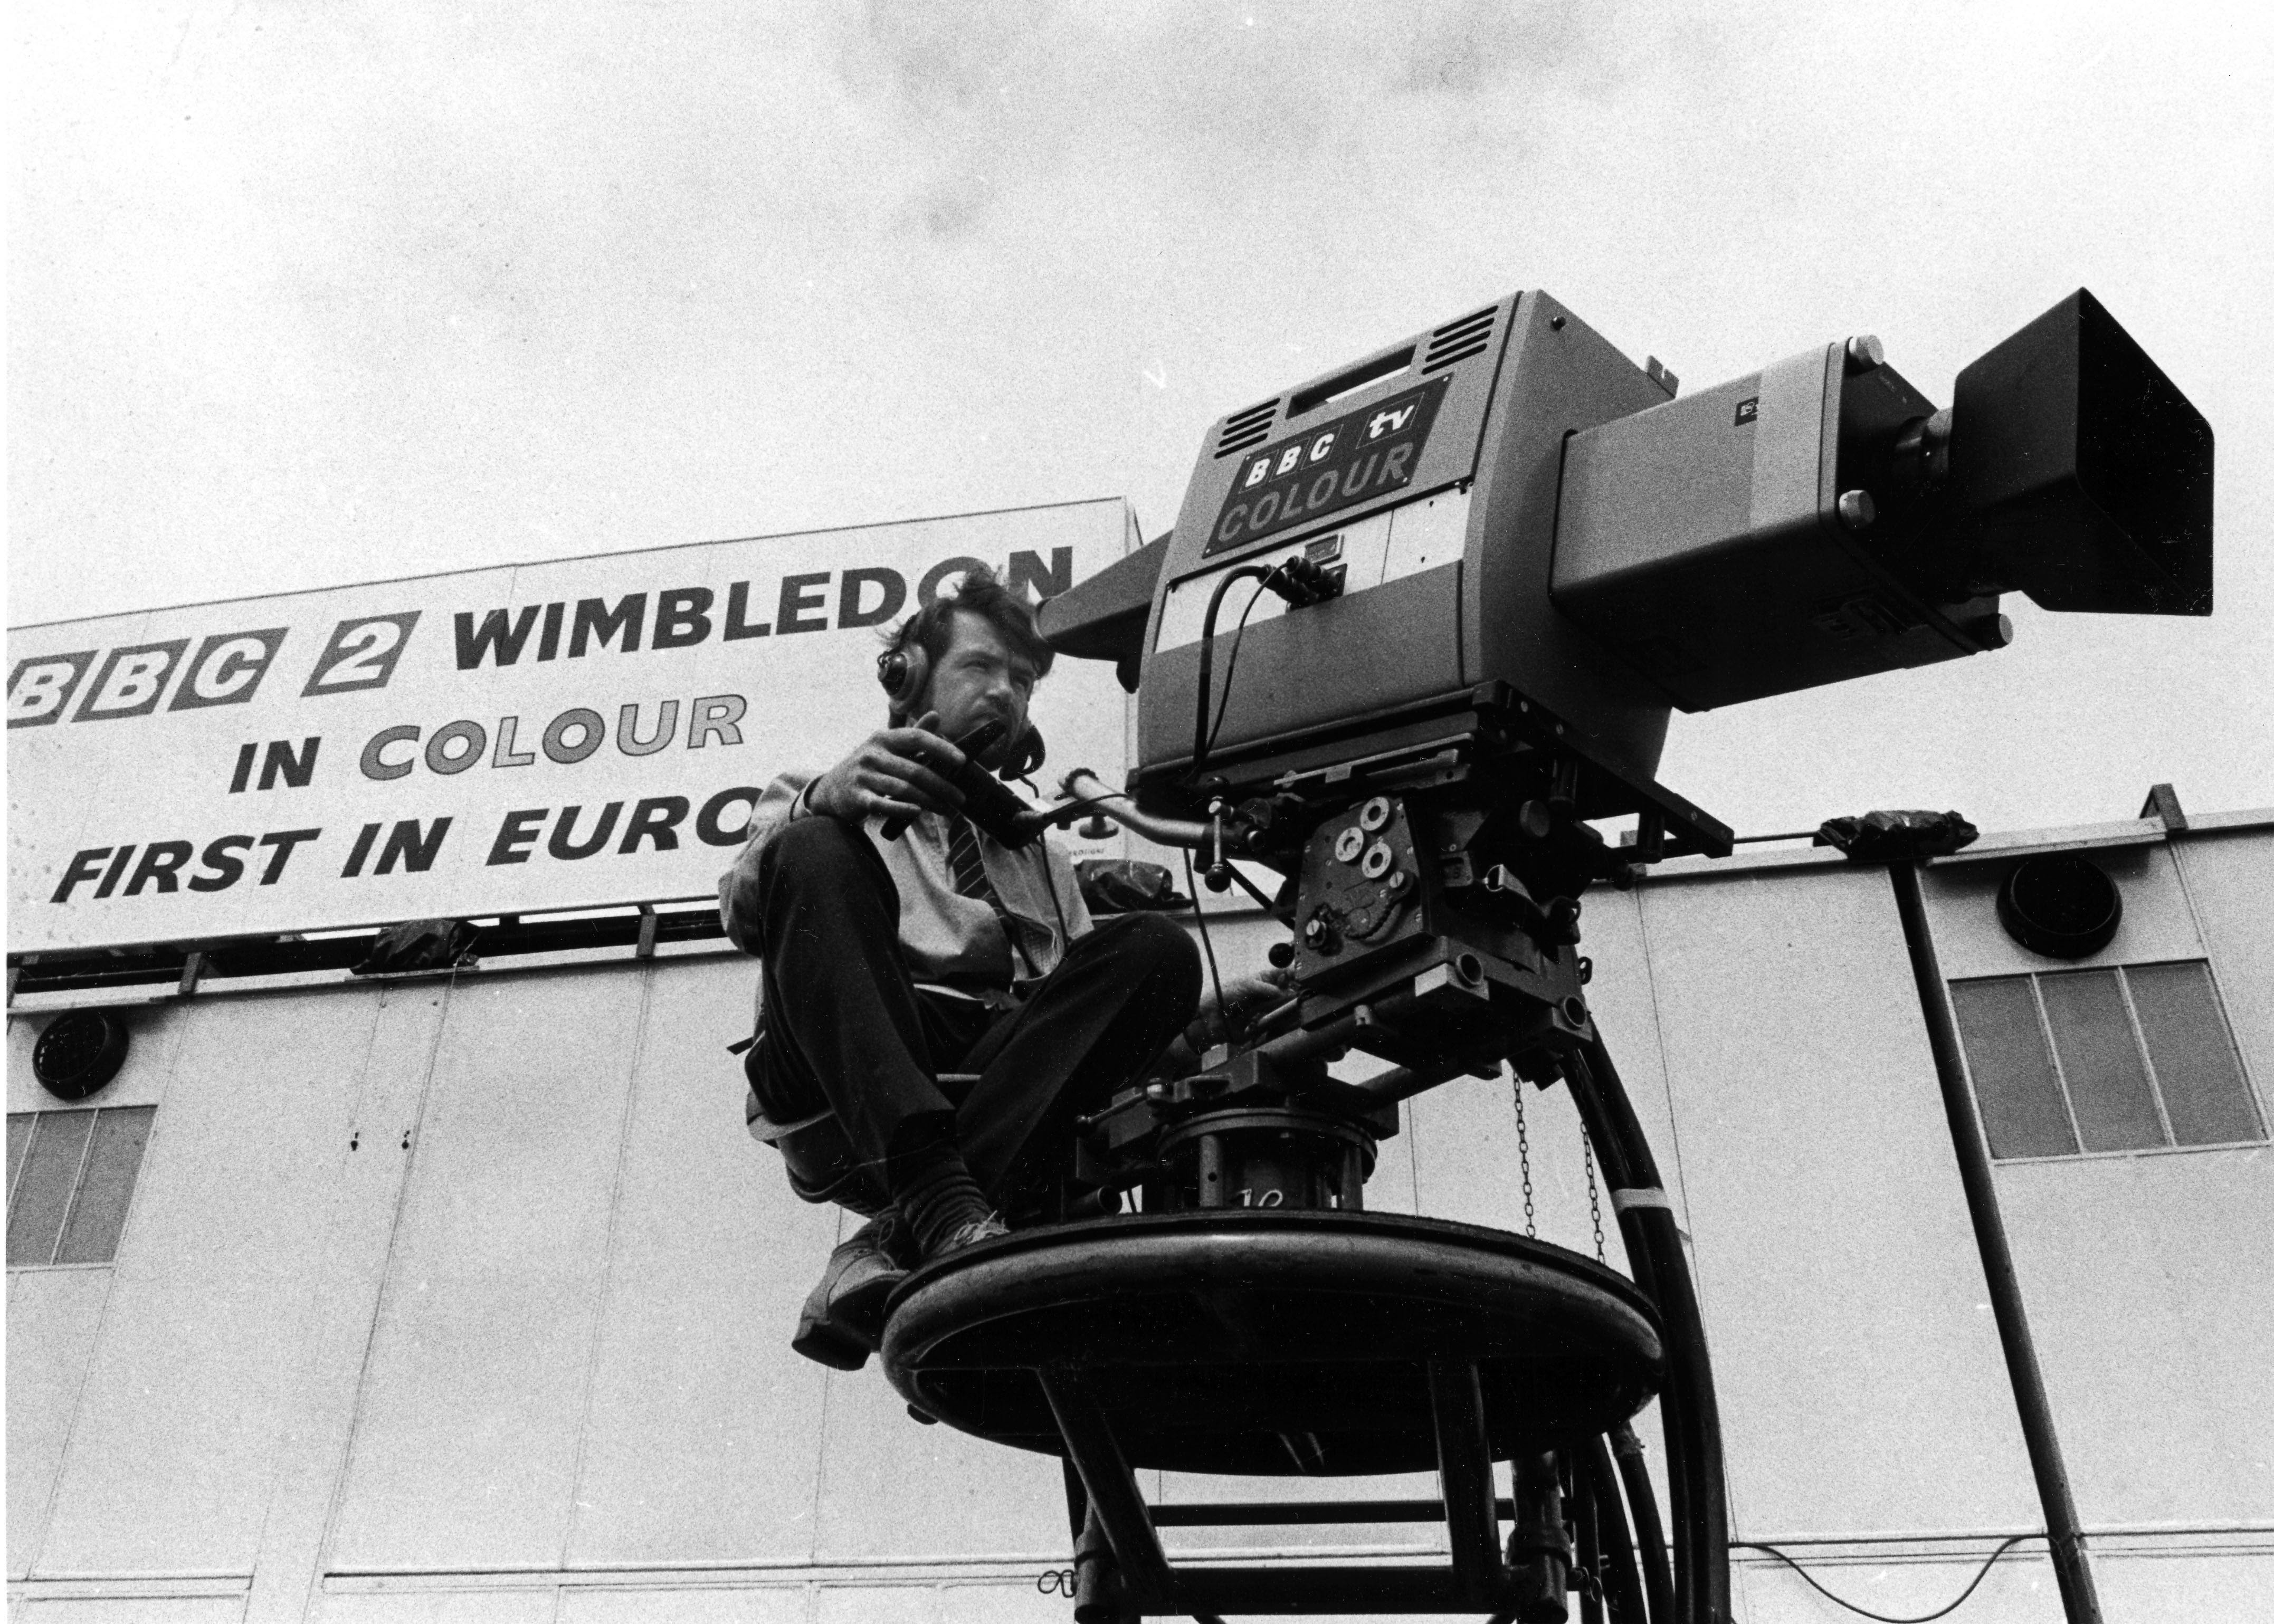 Colour broadcasts began on BBC2 in July 1967 with Wimbledon 